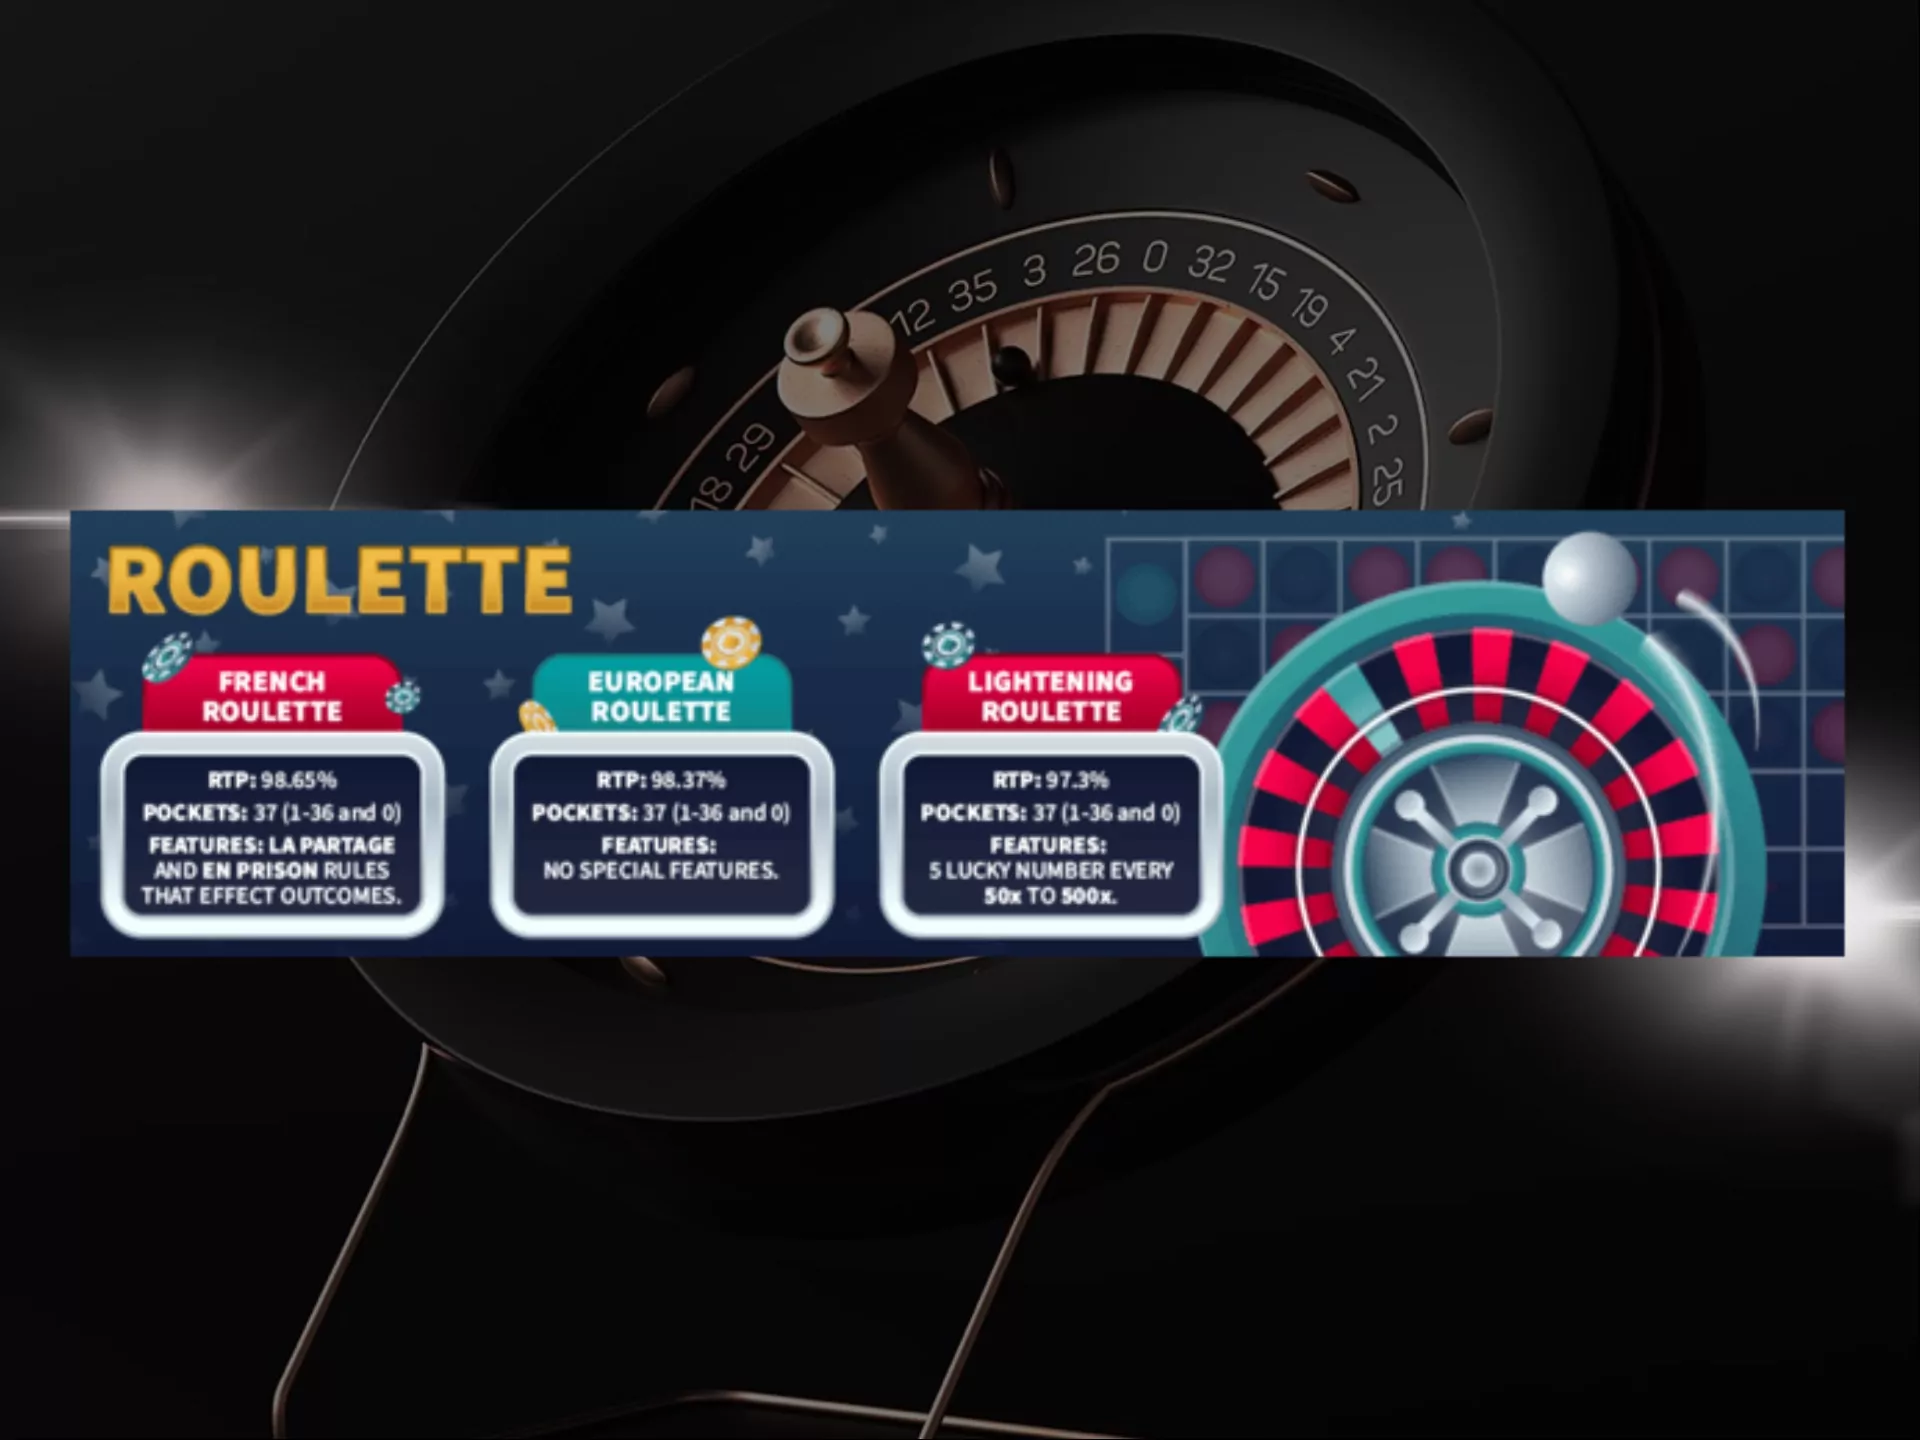 Choose European or French roulette to get more profitable bets and win more money.